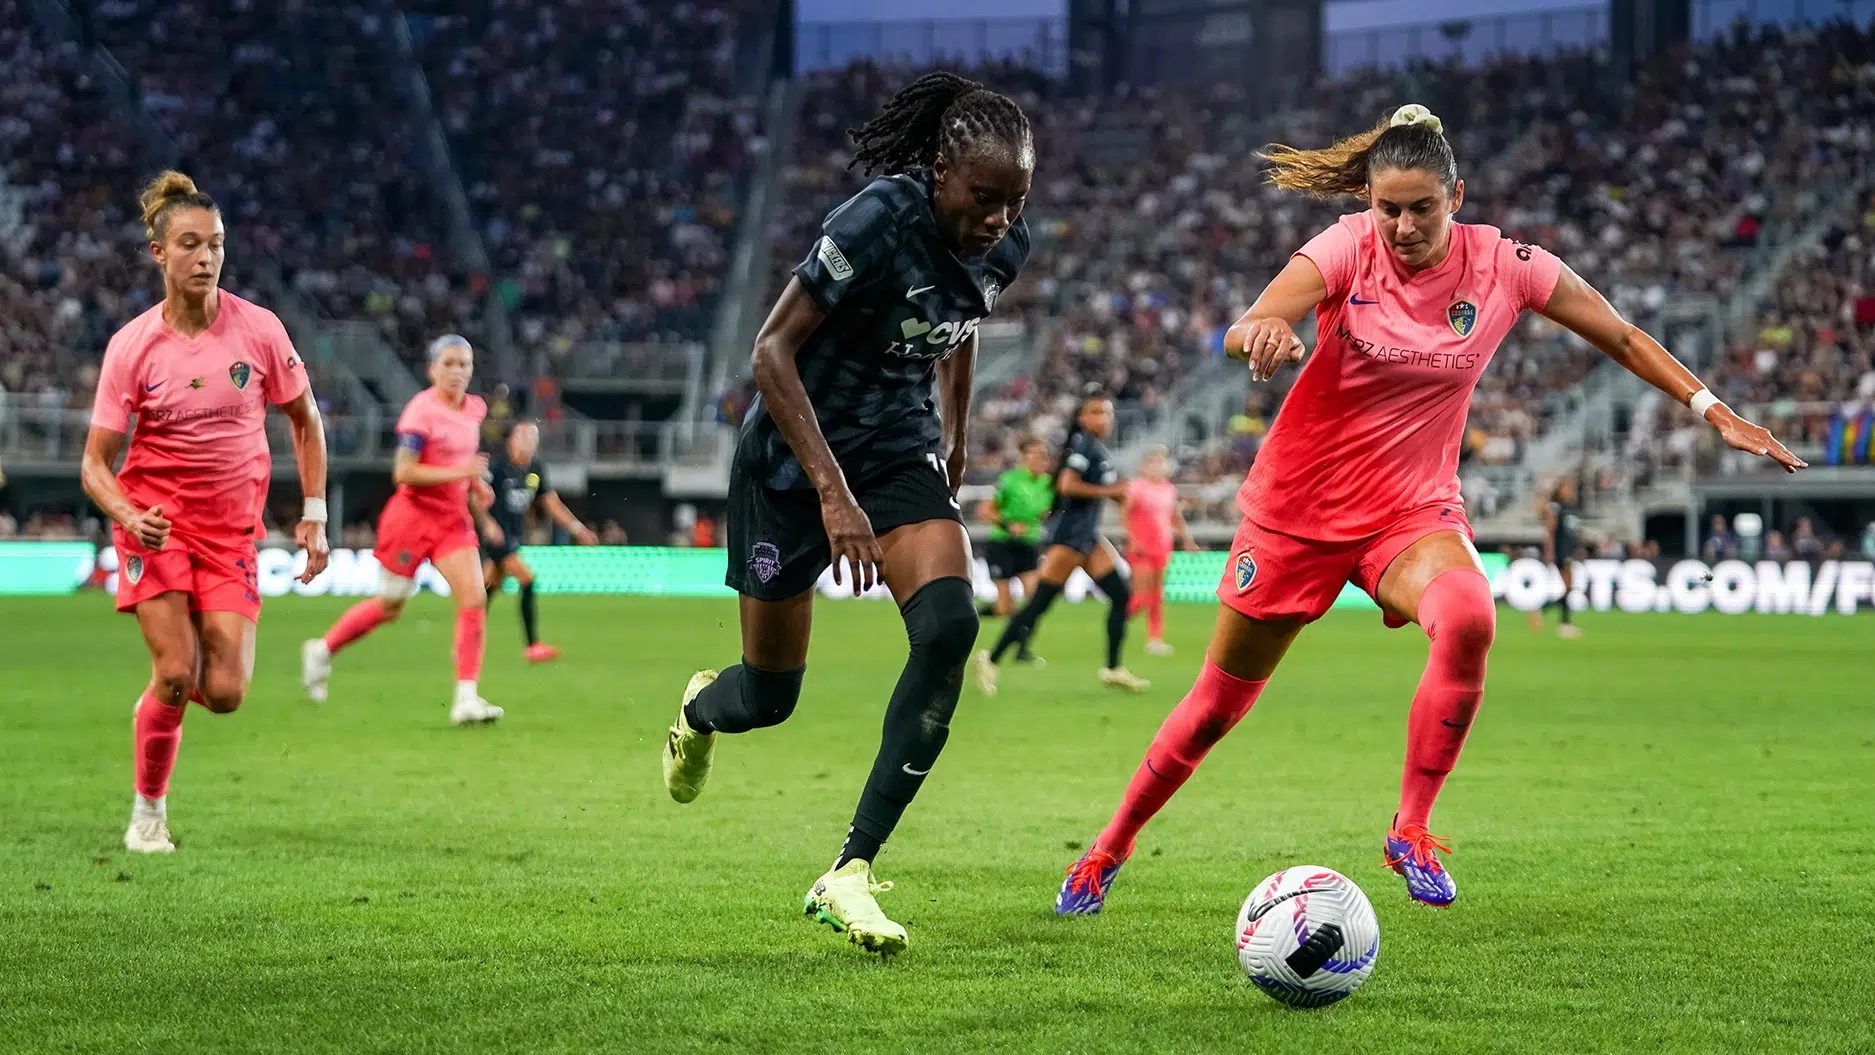 Ouleye Sarr dribbles the ball passed a NC Courage defender in pink.